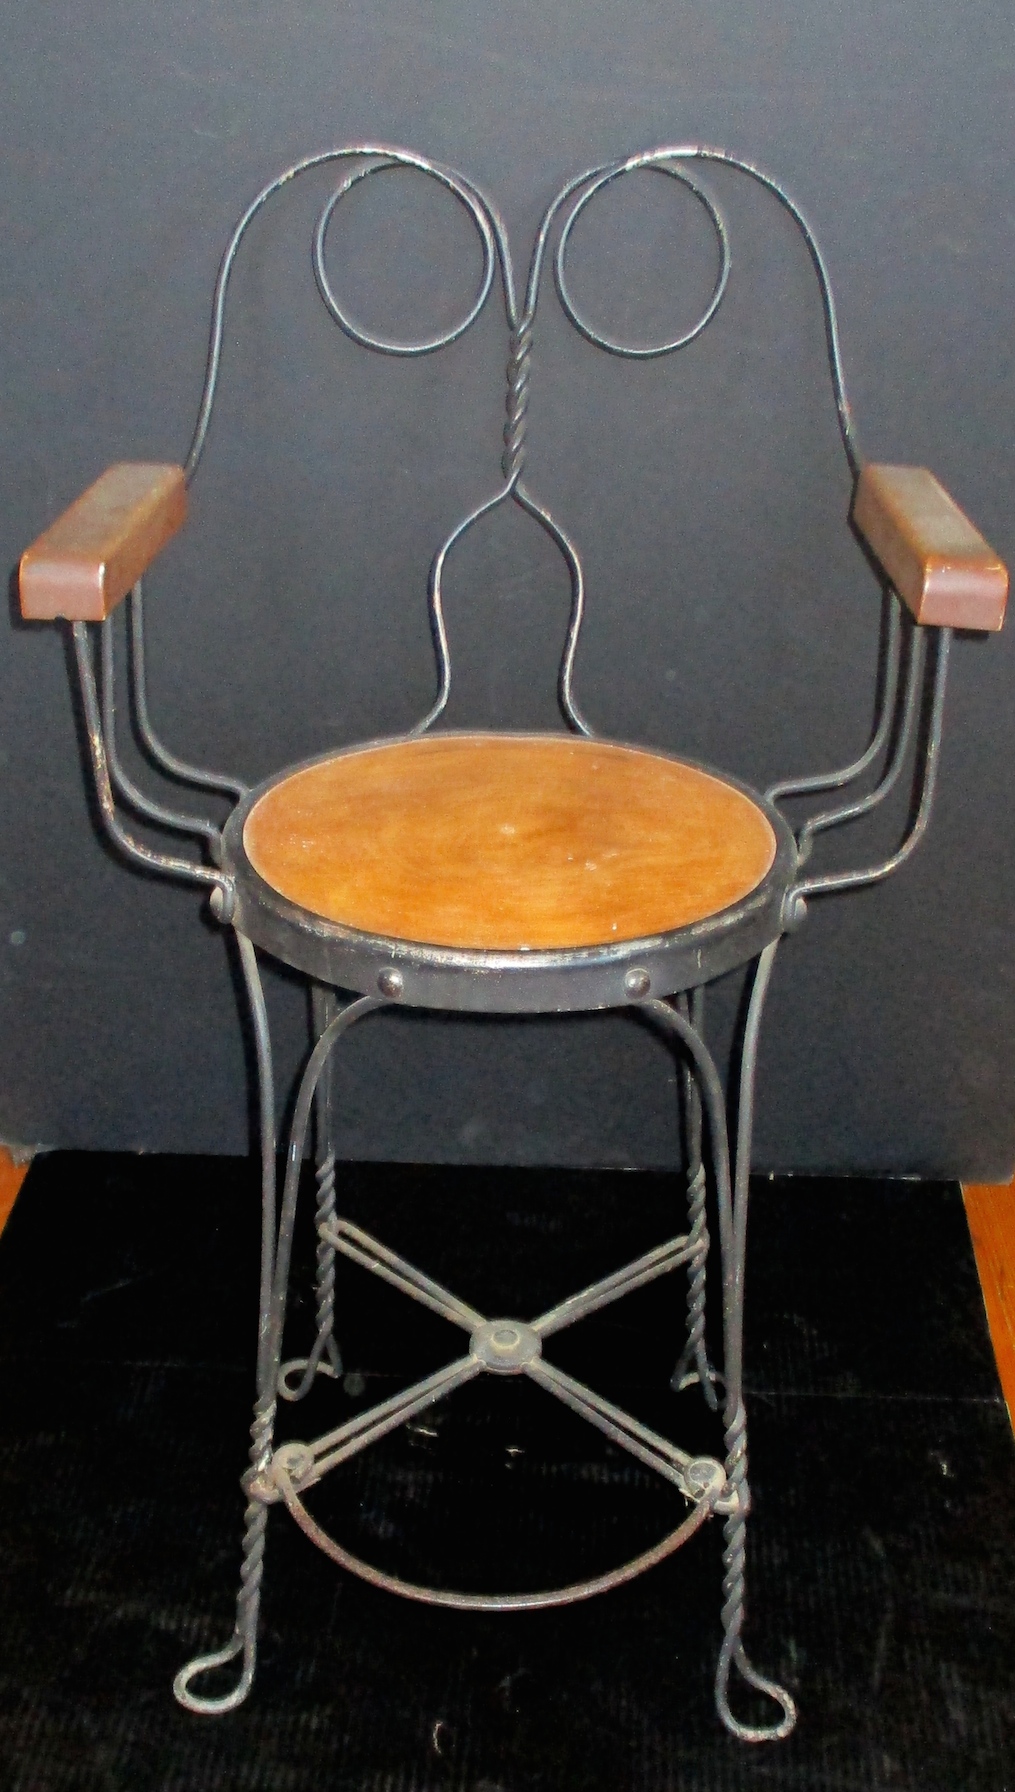 Twisted Wire Armed Billiards Chair